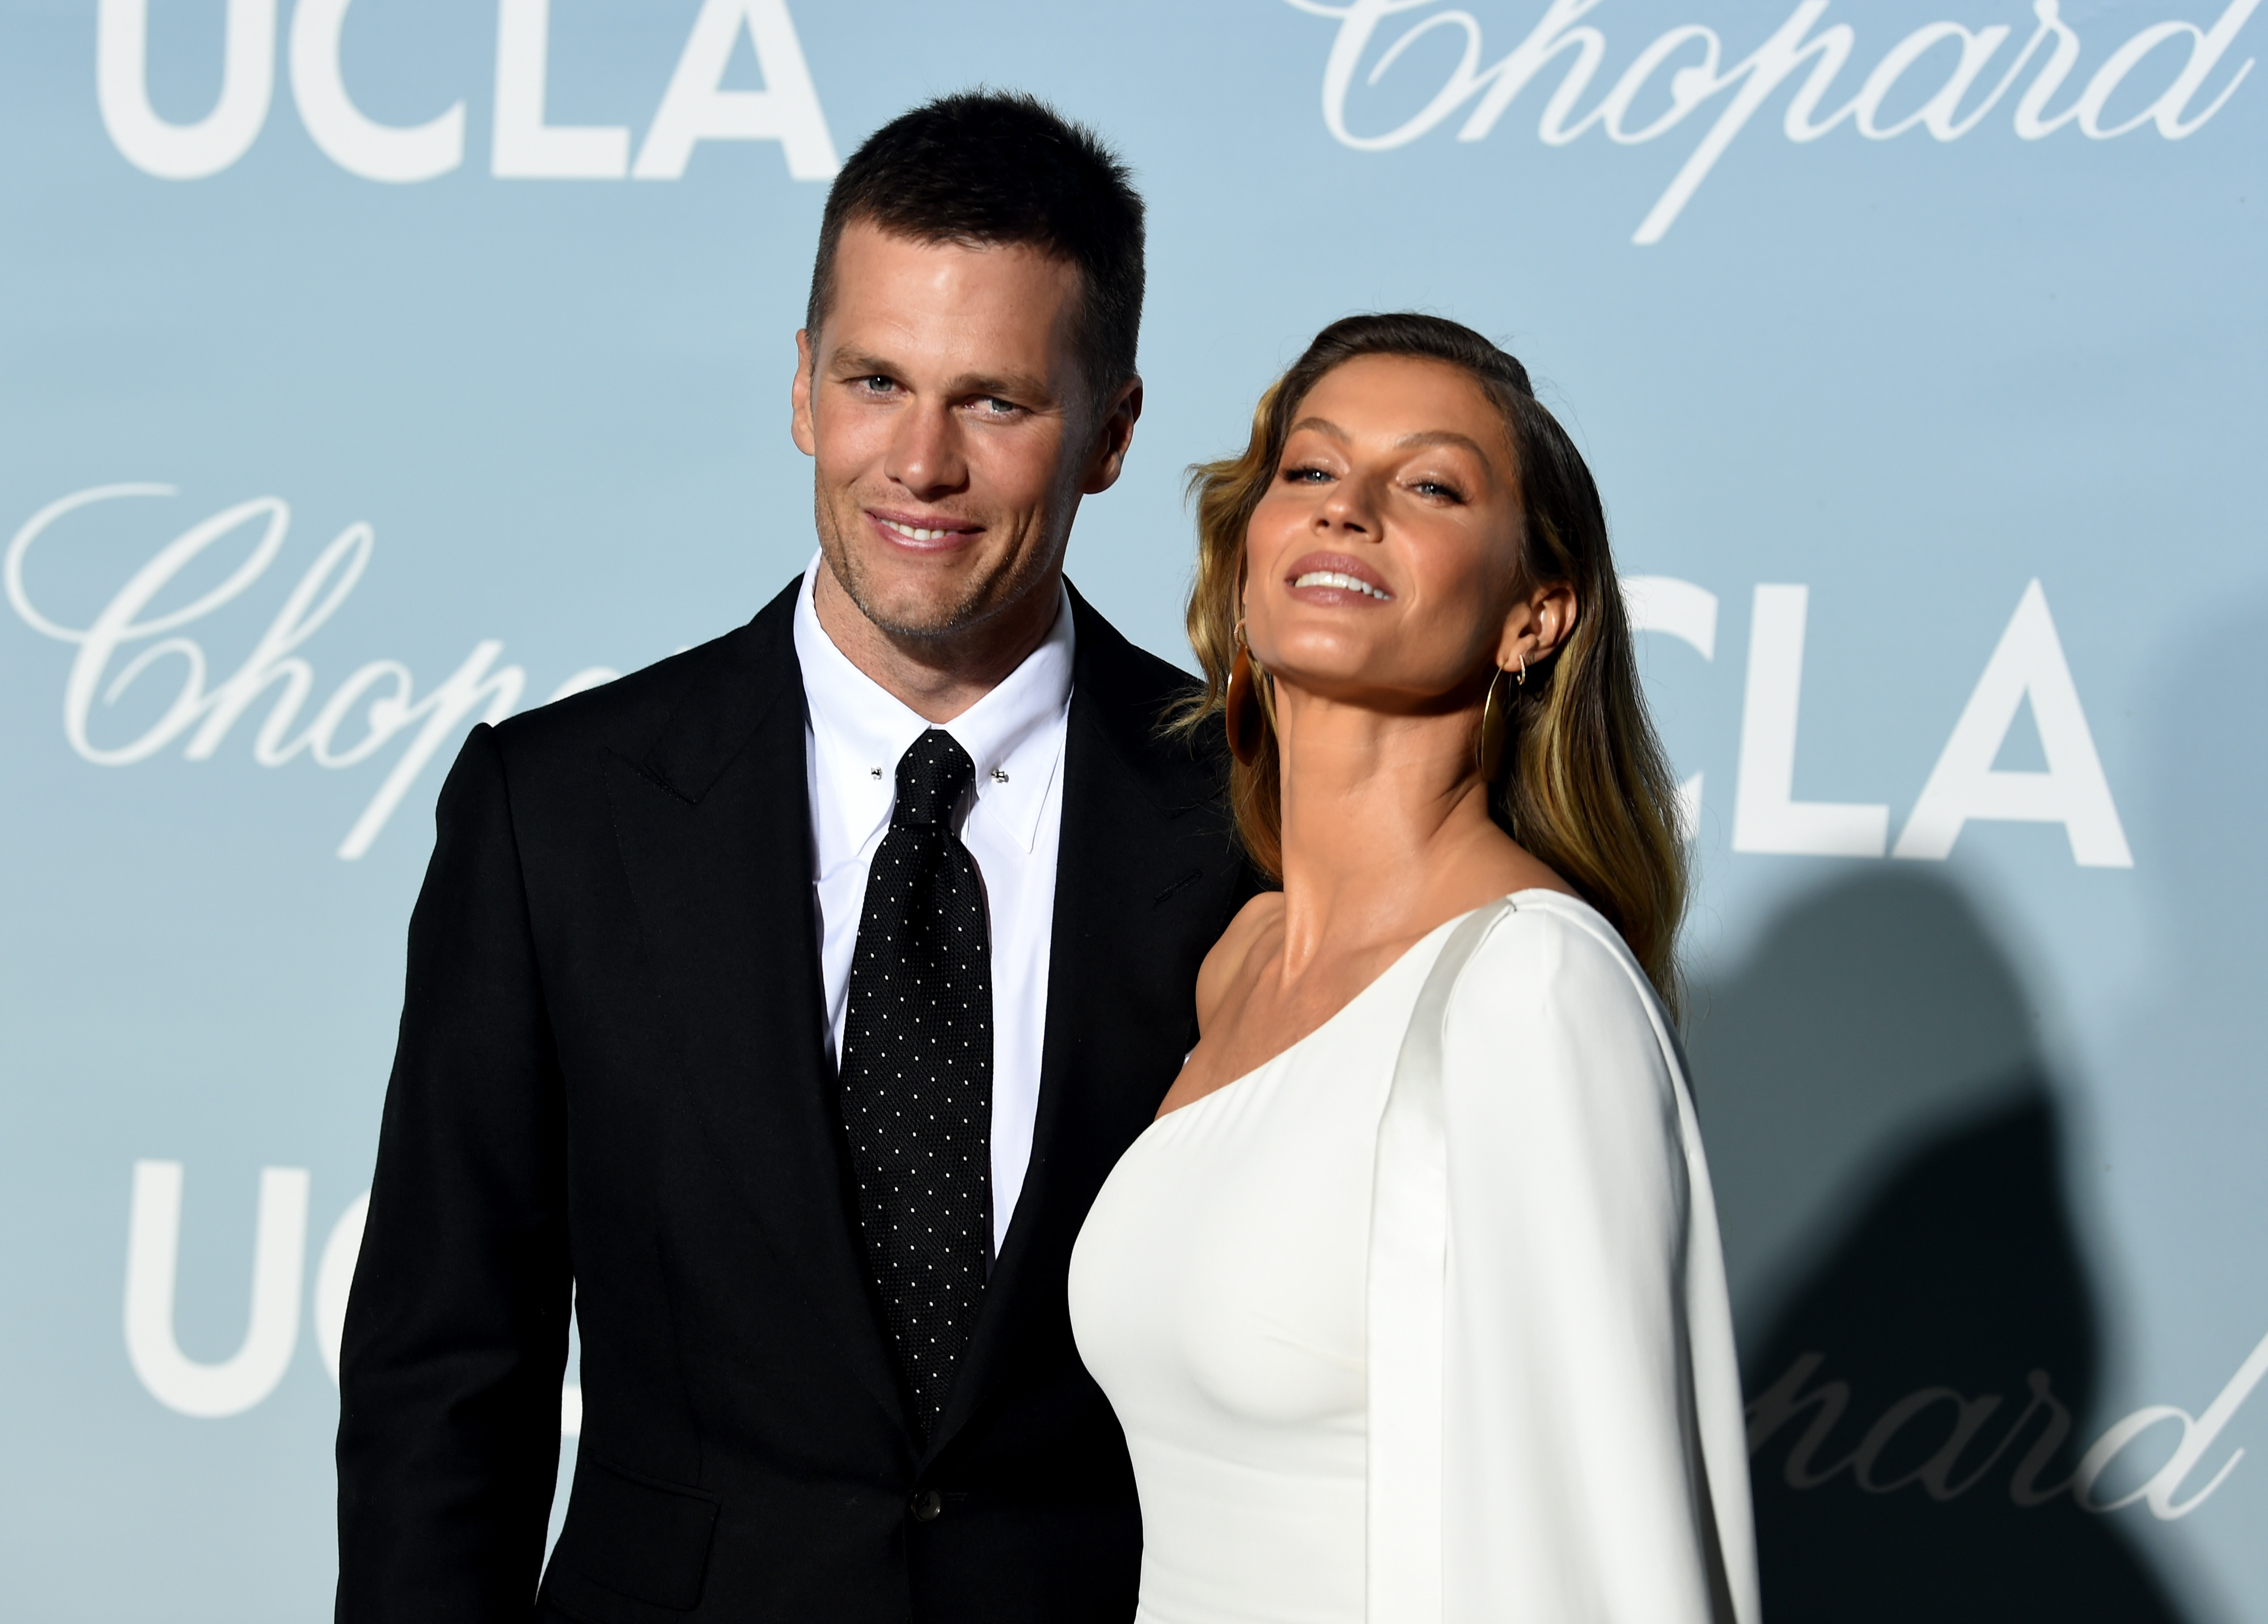 Tom Brady and Gisele Bündchen attend the 2019 Hollywood For Science Gala at Private Residence on February 21, 2019, in Los Angeles, California. | Source: Getty Images